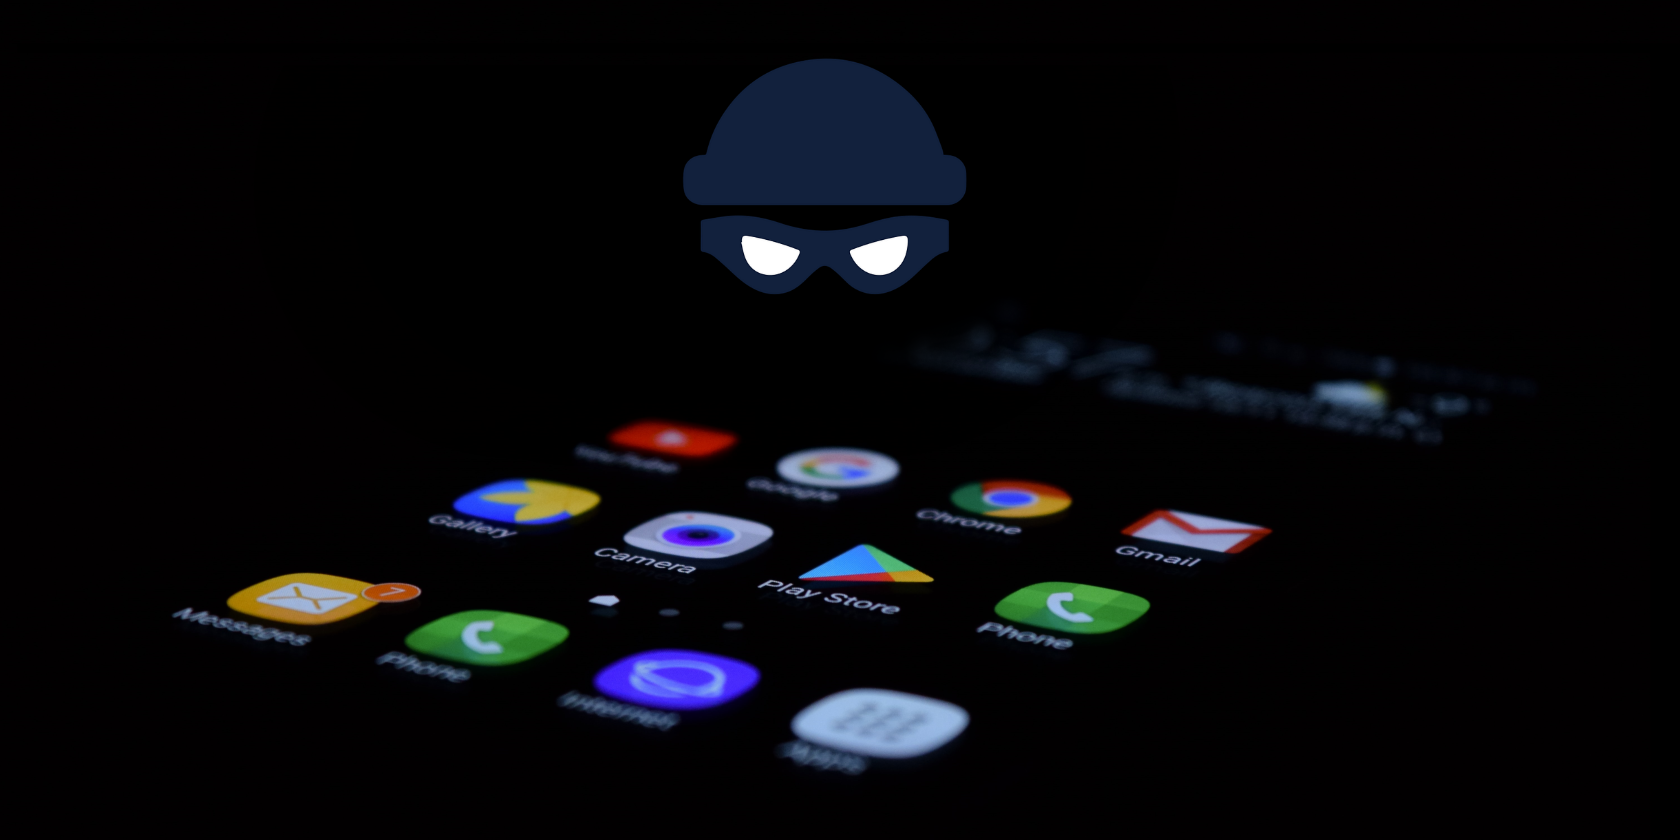 Apps on Android, with a hacker icon hovering above